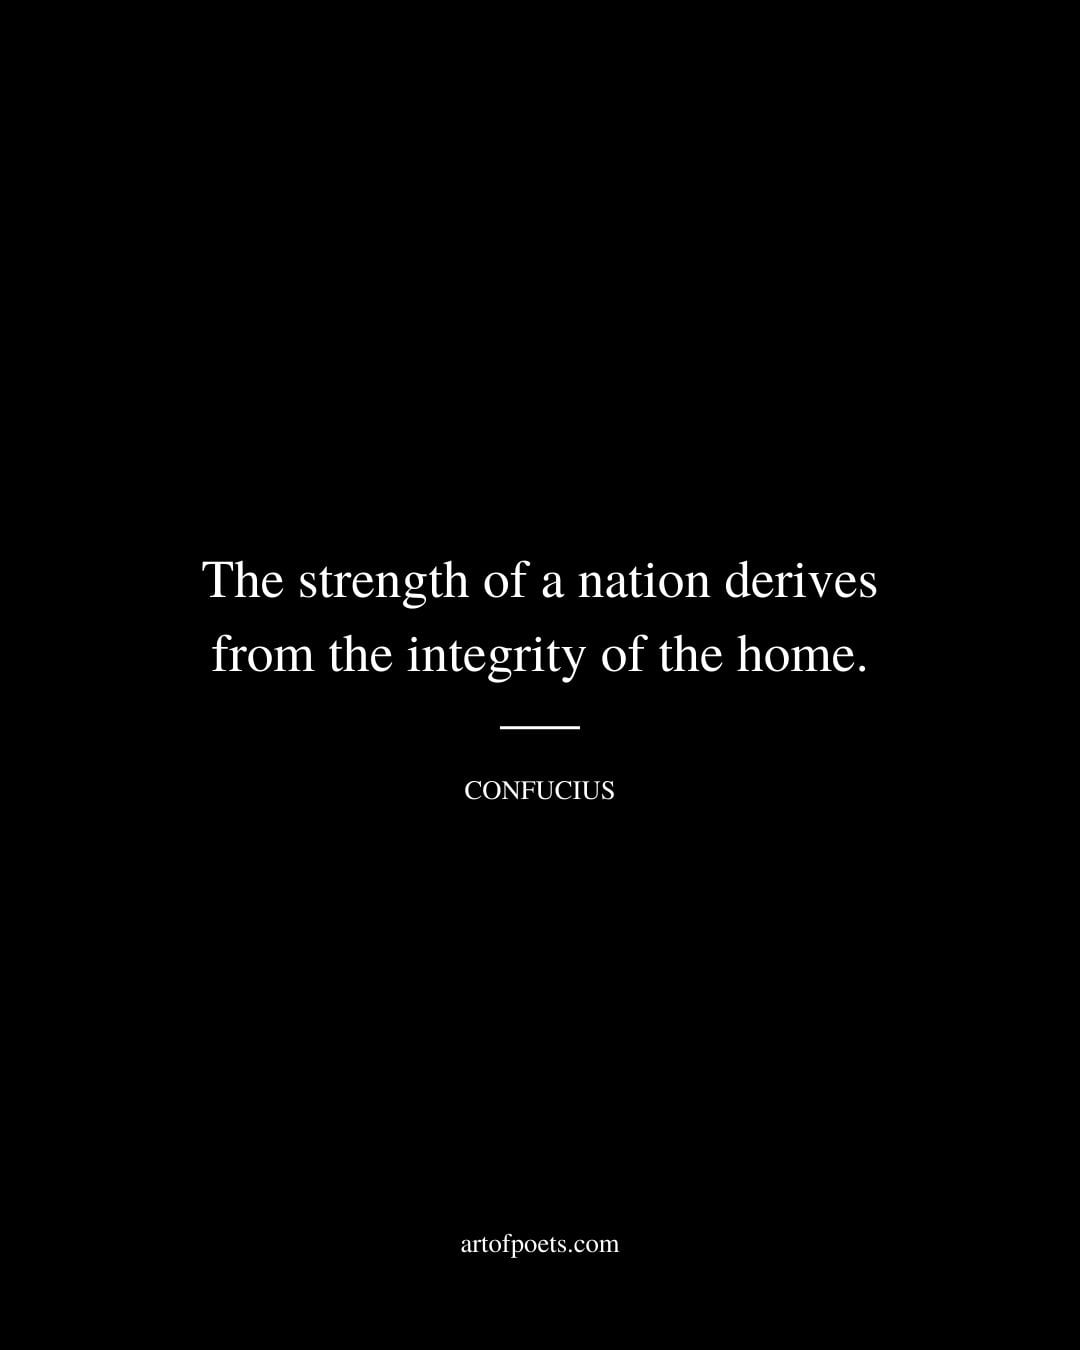 The strength of a nation derives from the integrity of the home